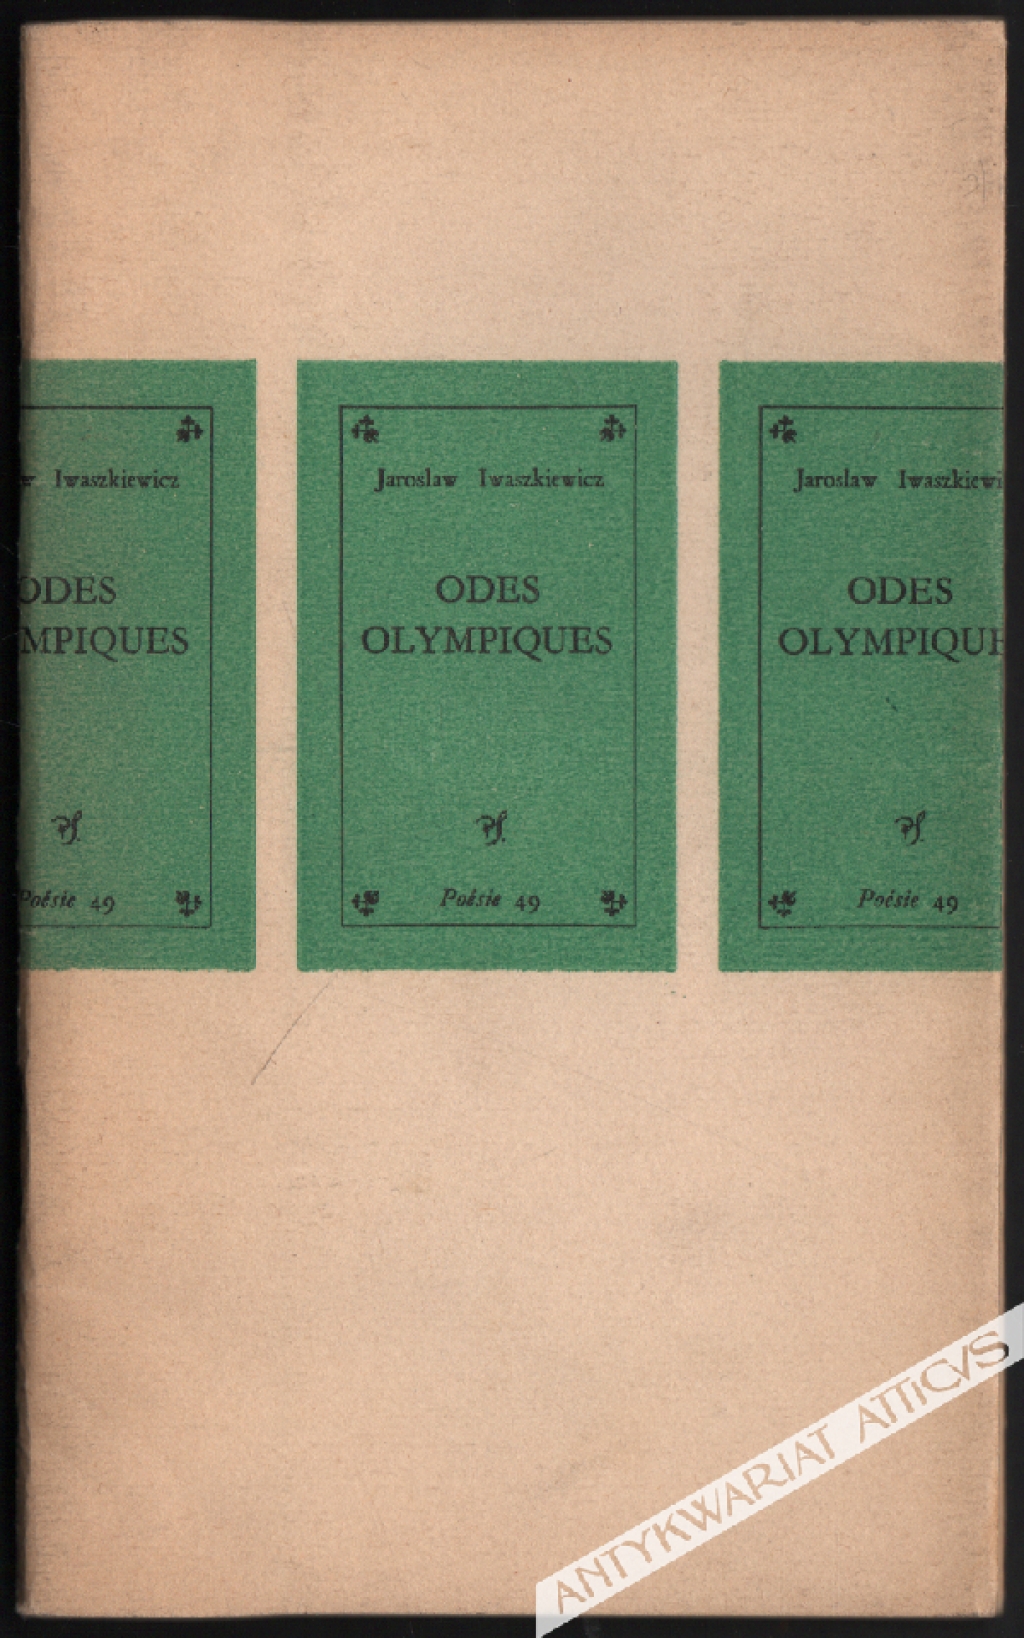 Odes Olympiques